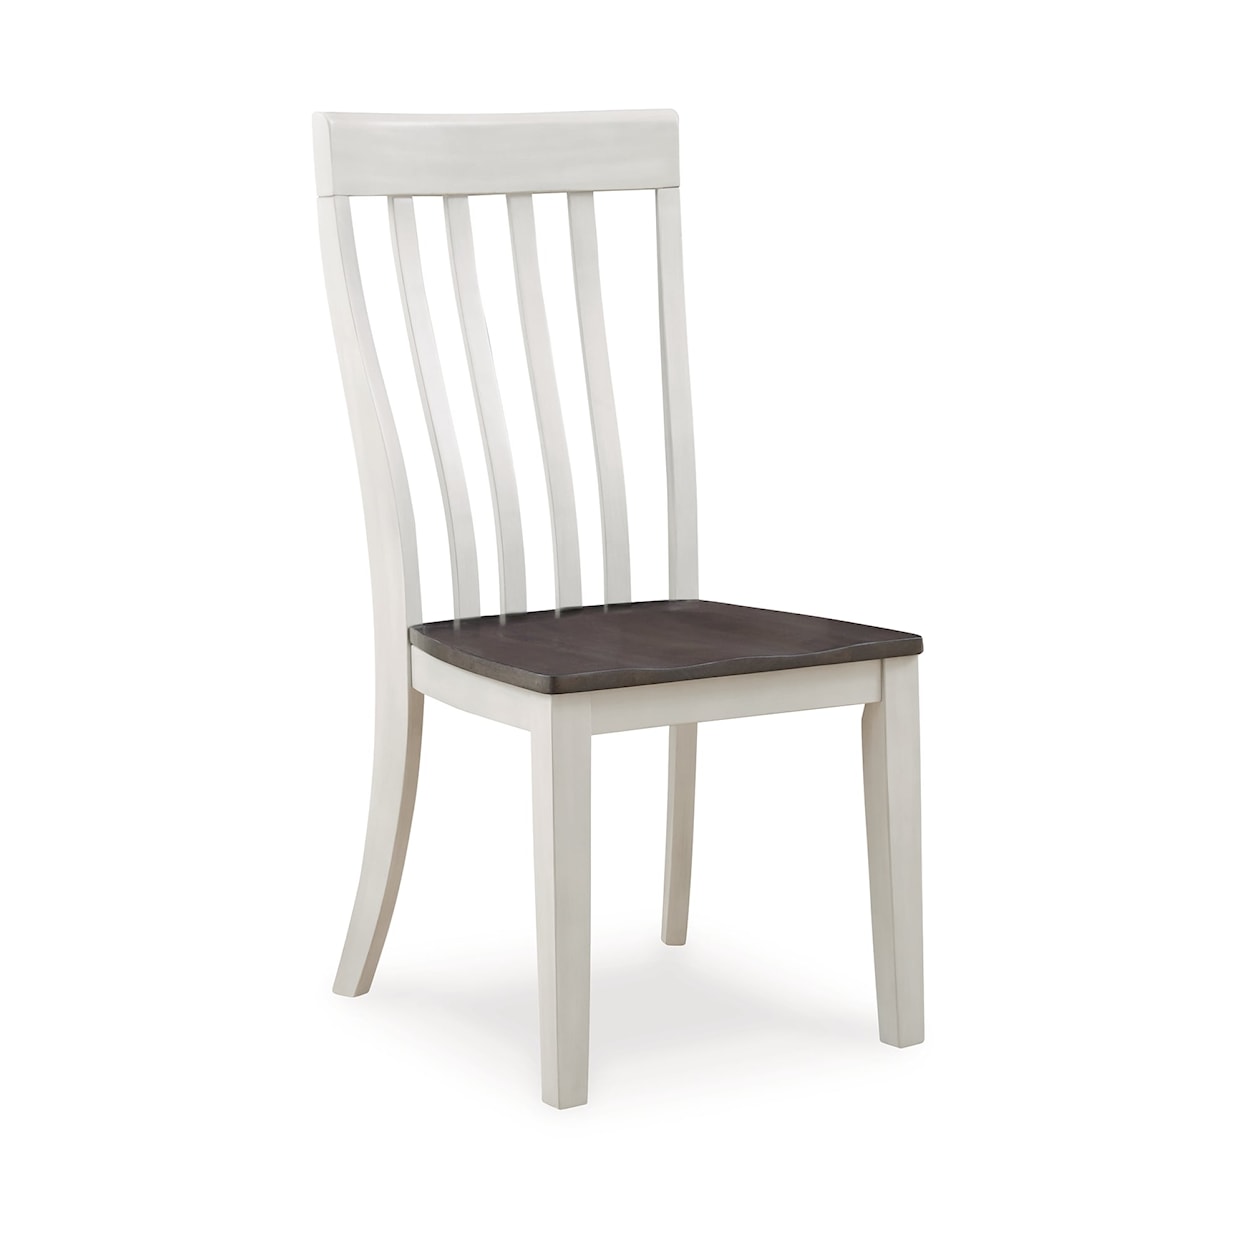 Benchcraft Darborn Dining Room Side Chair